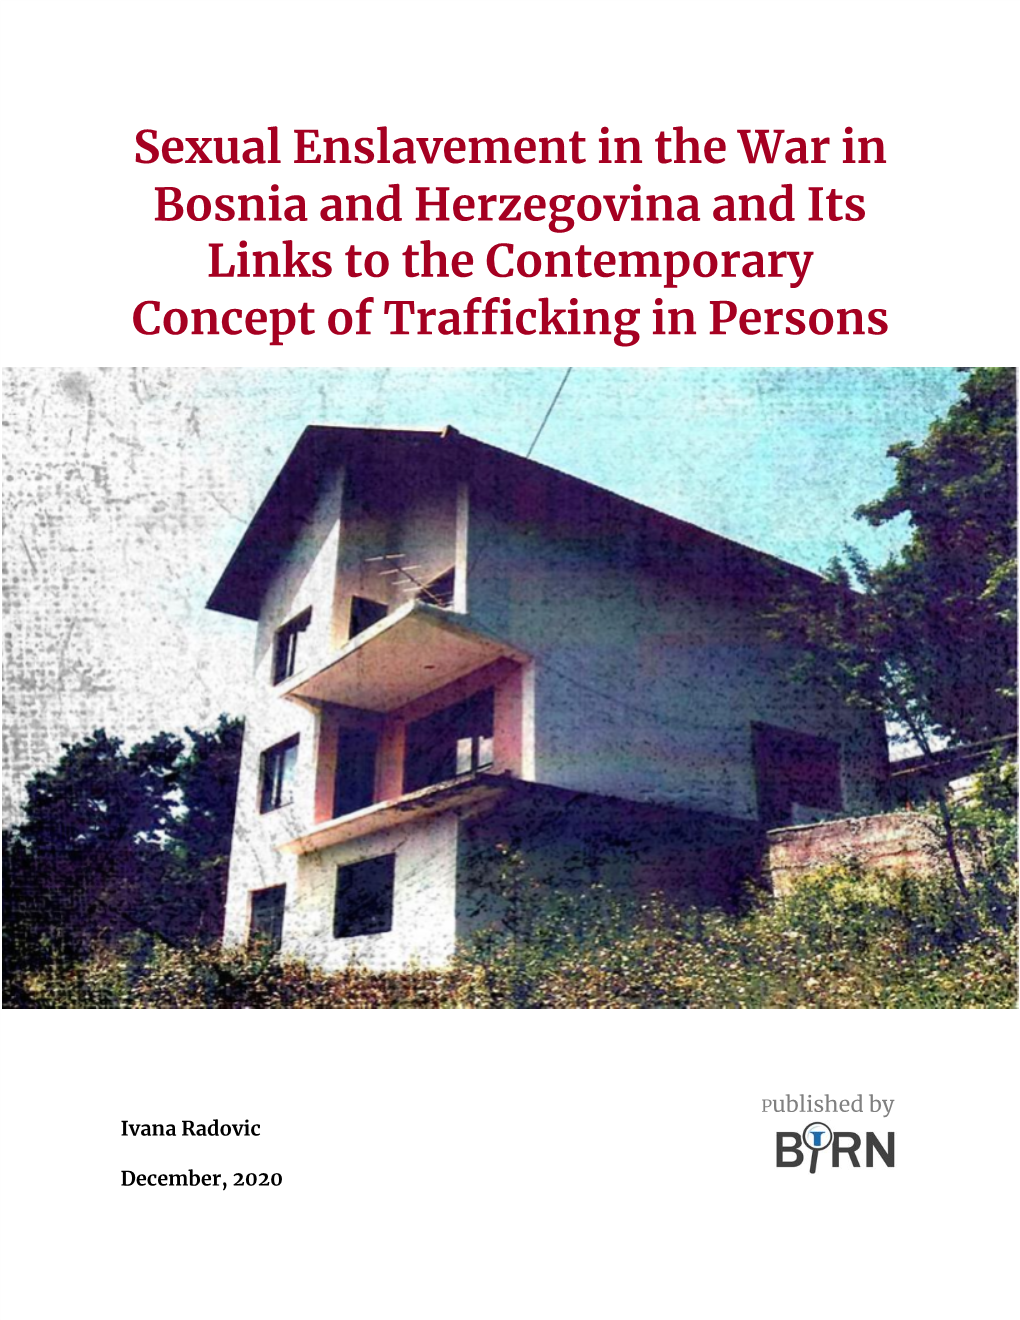 Sexual Enslavement in the War in Bosnia and Herzegovina and Its Links to the Contemporary Concept of Trafficking in Persons